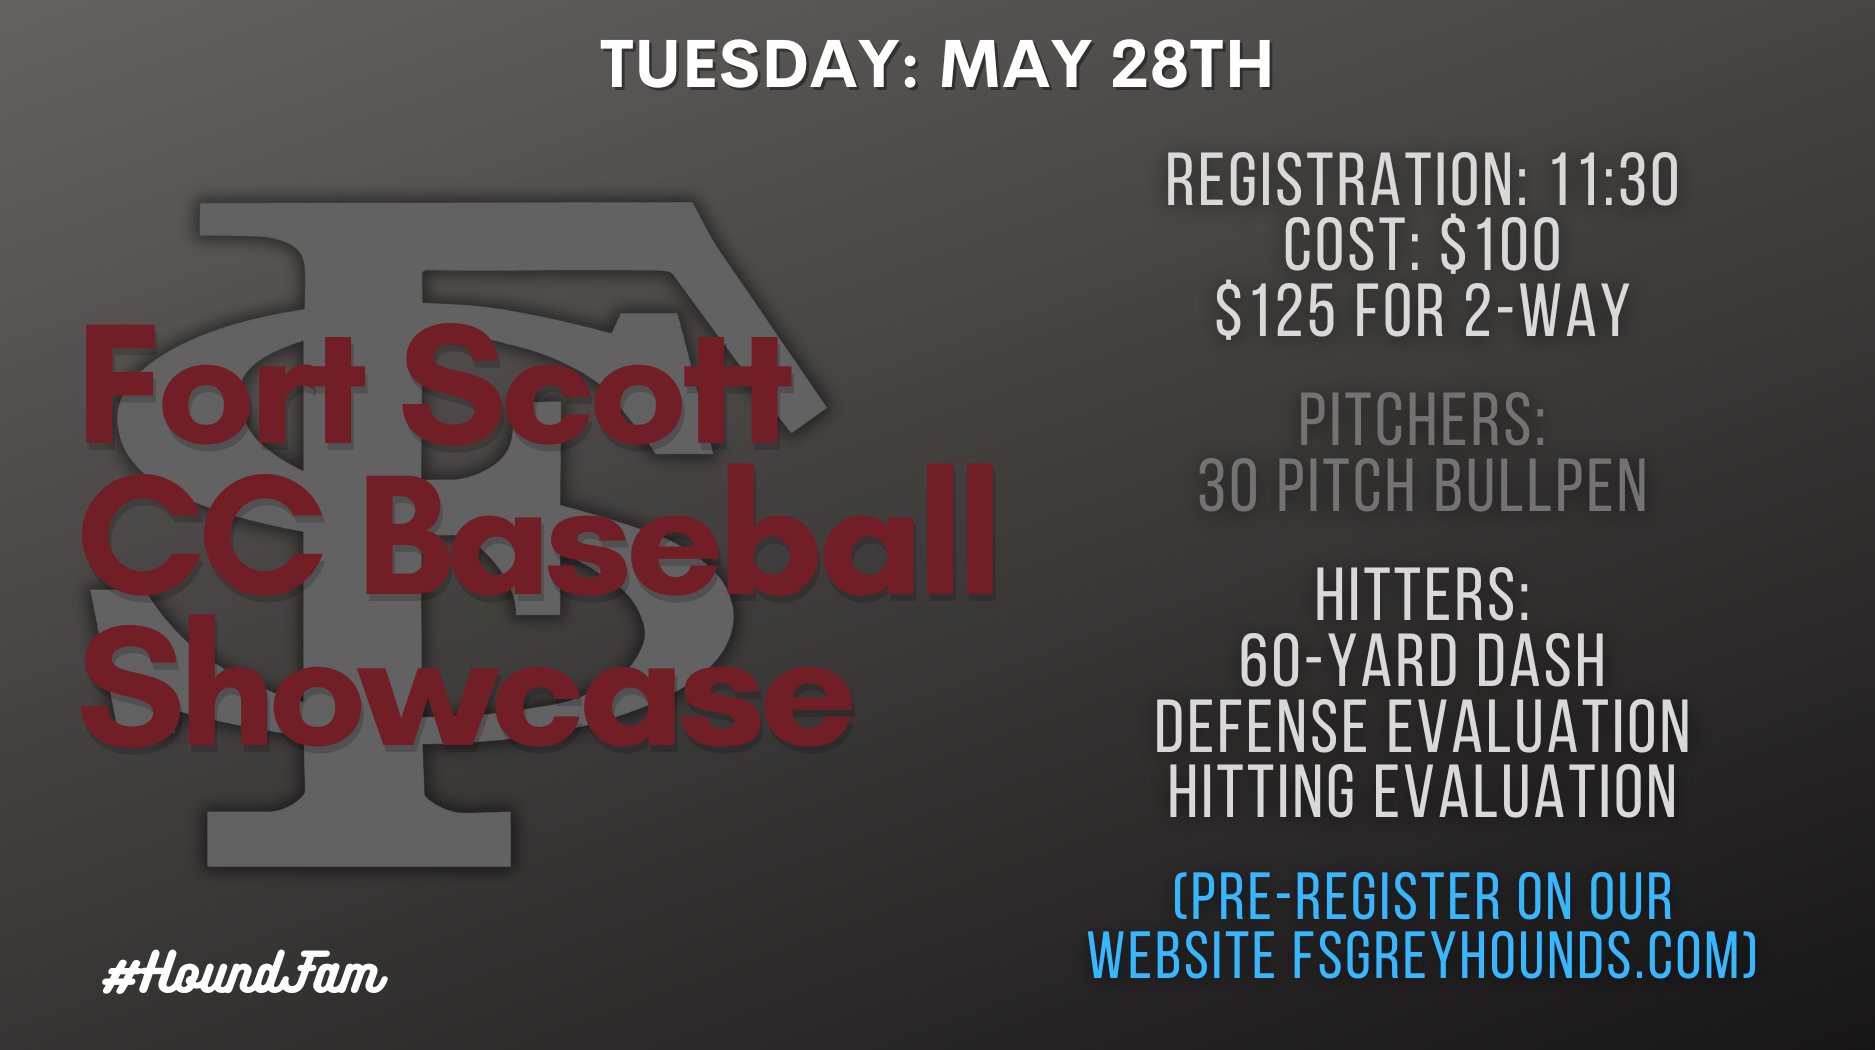 Fort Scott CC Baseball Showcase. Tuesday: May 28th. REGISTRATION: 11:30 cost: $100, $125 FOR 2-WAY. pitchers: 30 pitch bullpen. HITTERS: 60-YARD DASH DEFENSE EVALUATION HITTING EVALUATION. (PRE-REGISTER ON OUR WEBSITE FSGREYHOUNDS.COM)